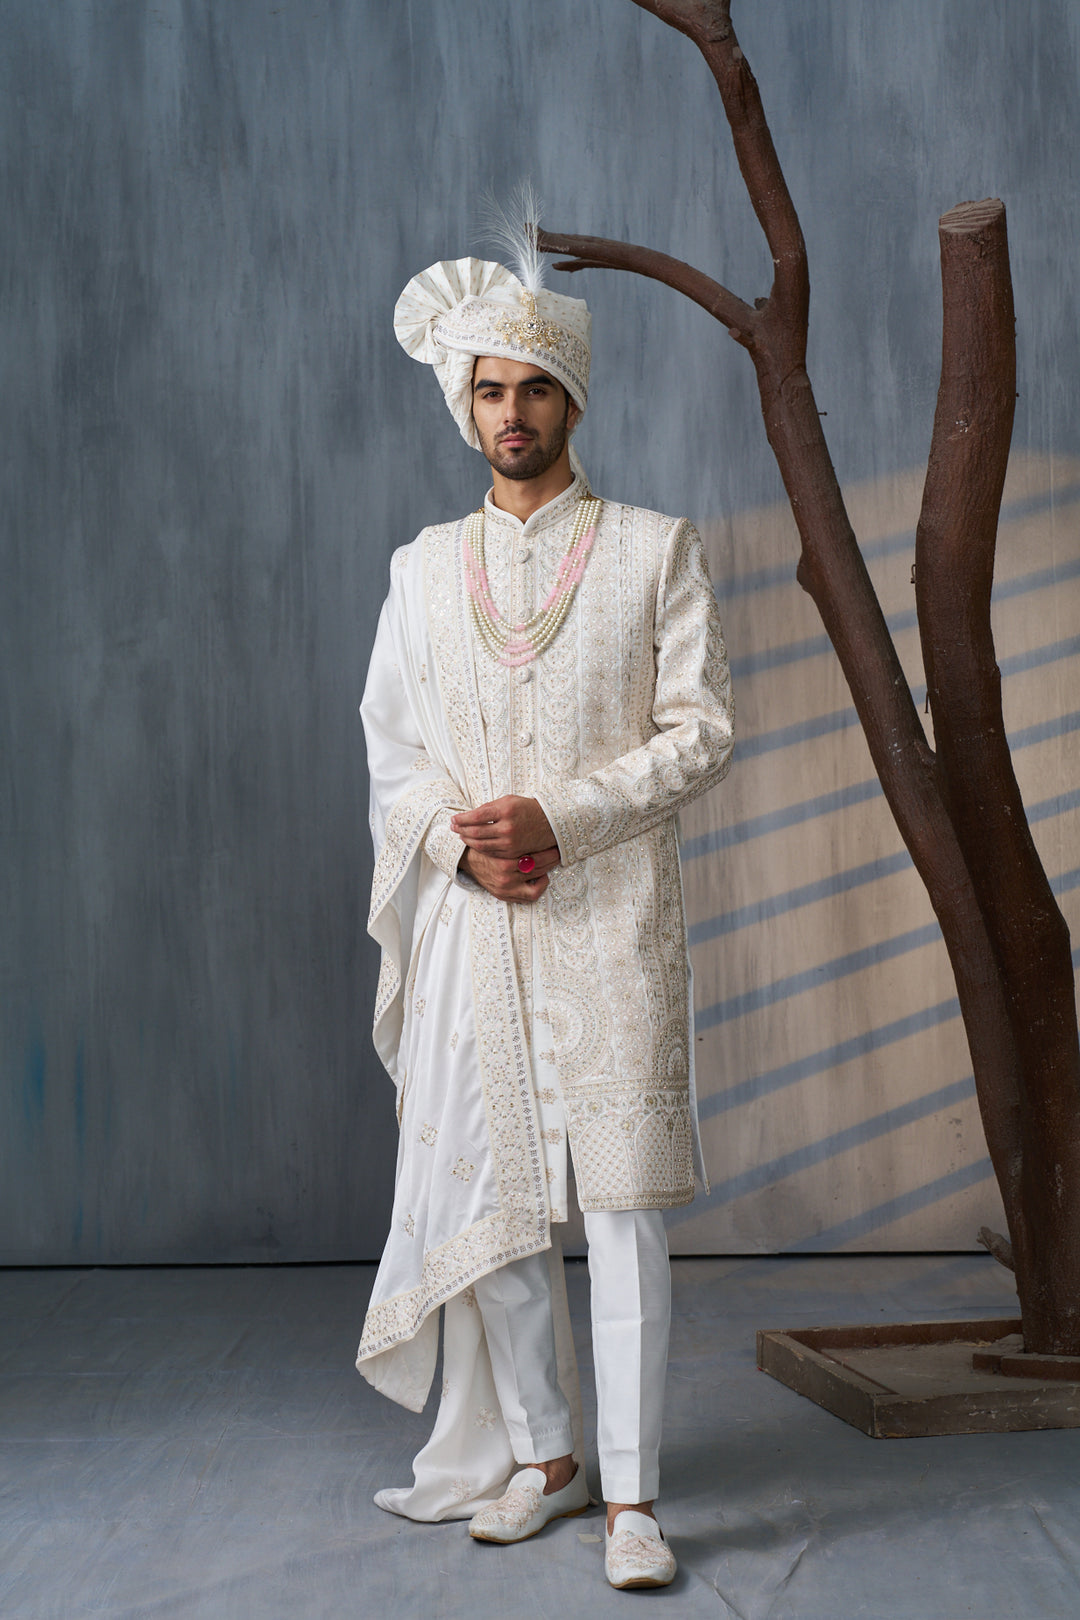 Ivory Silk men’s wedding sherwani with gold embellishments (accessories included)